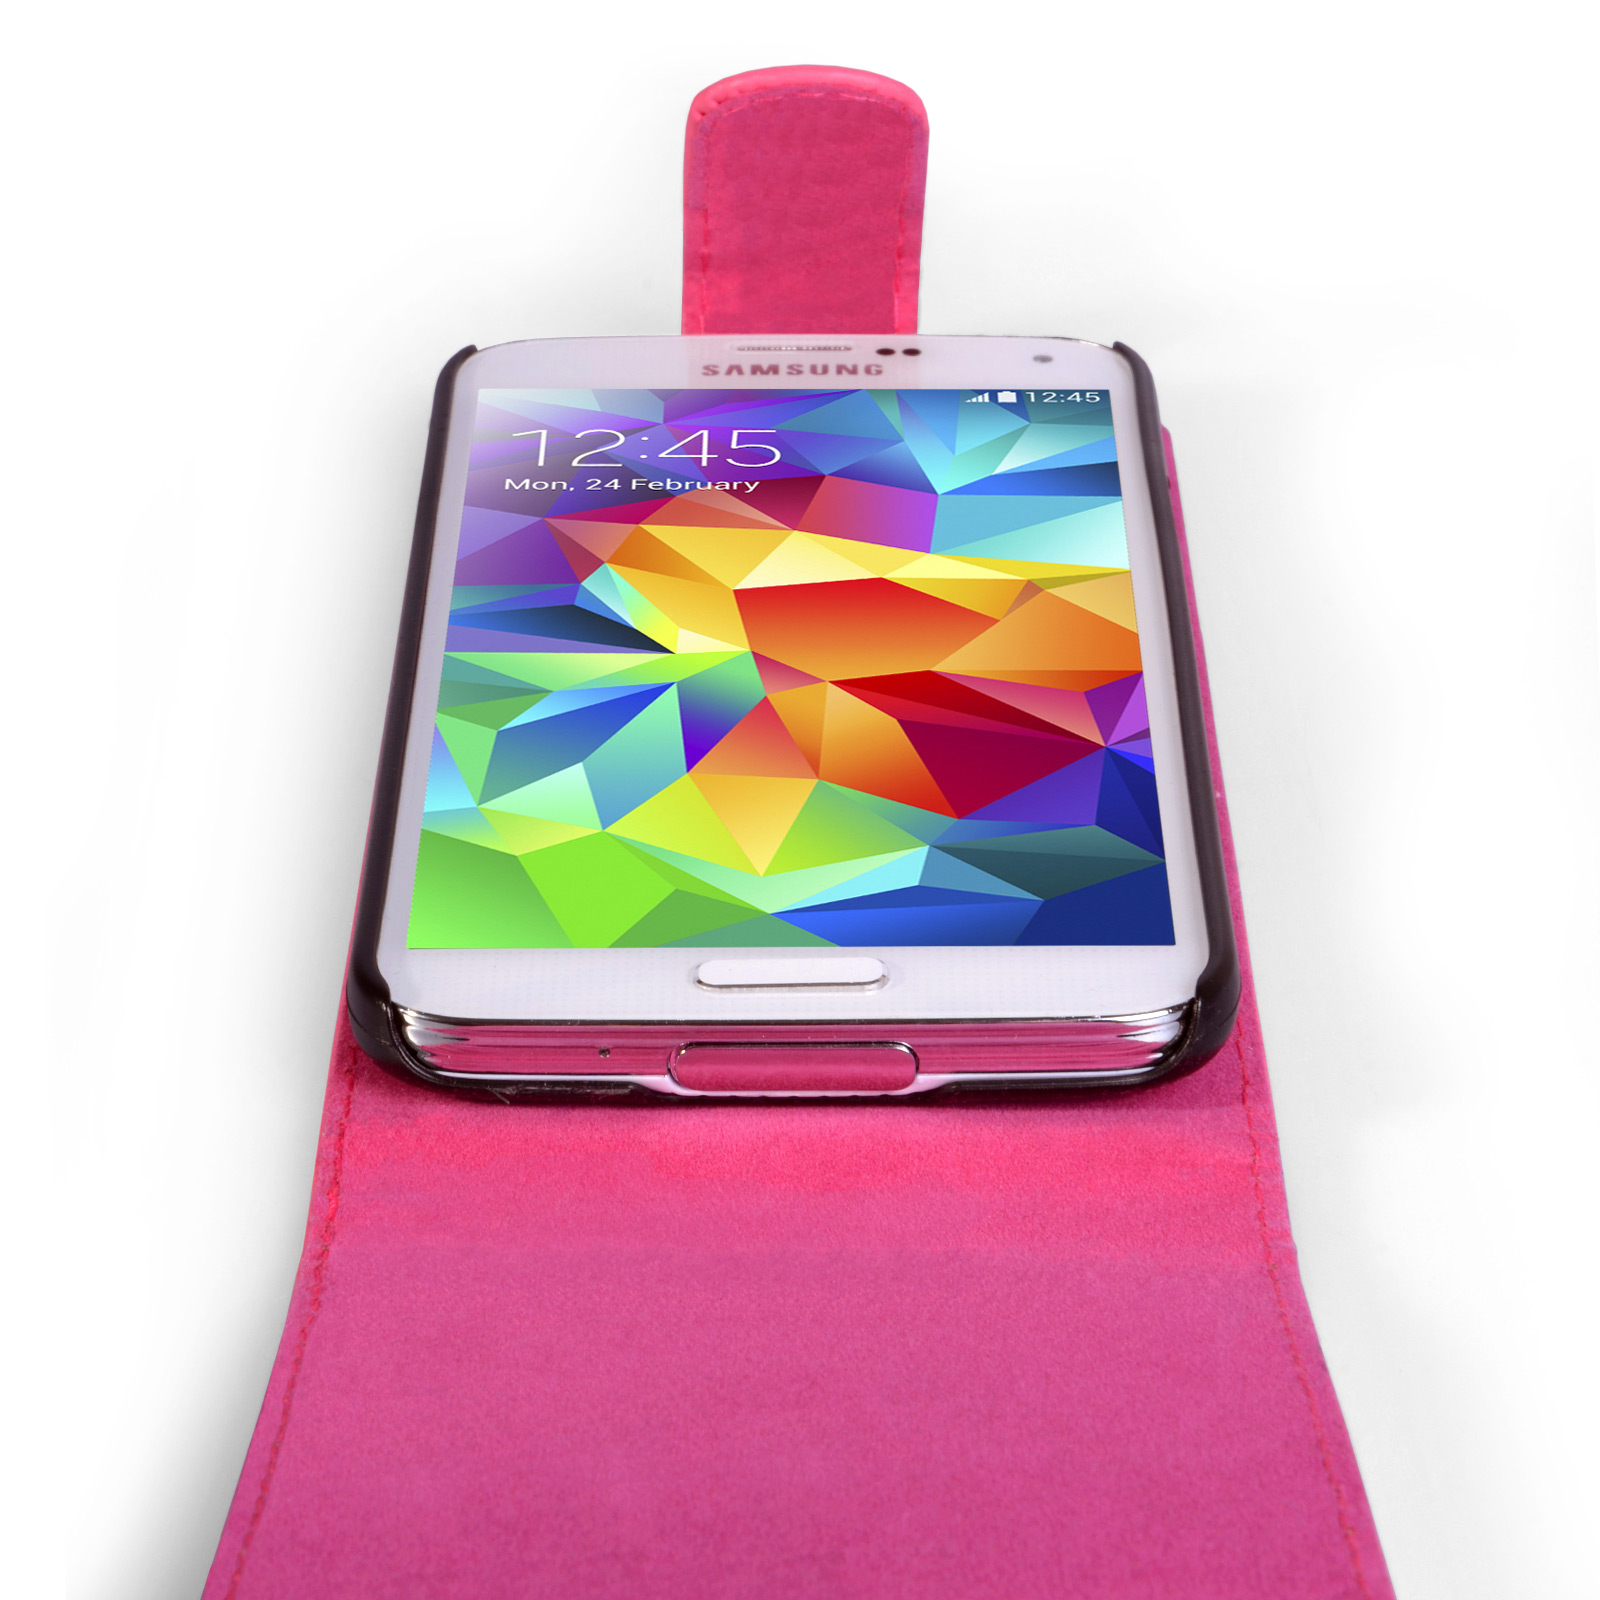 YouSave Samsung Galaxy S5 Leather-Effect Flip Case - Hot Pink